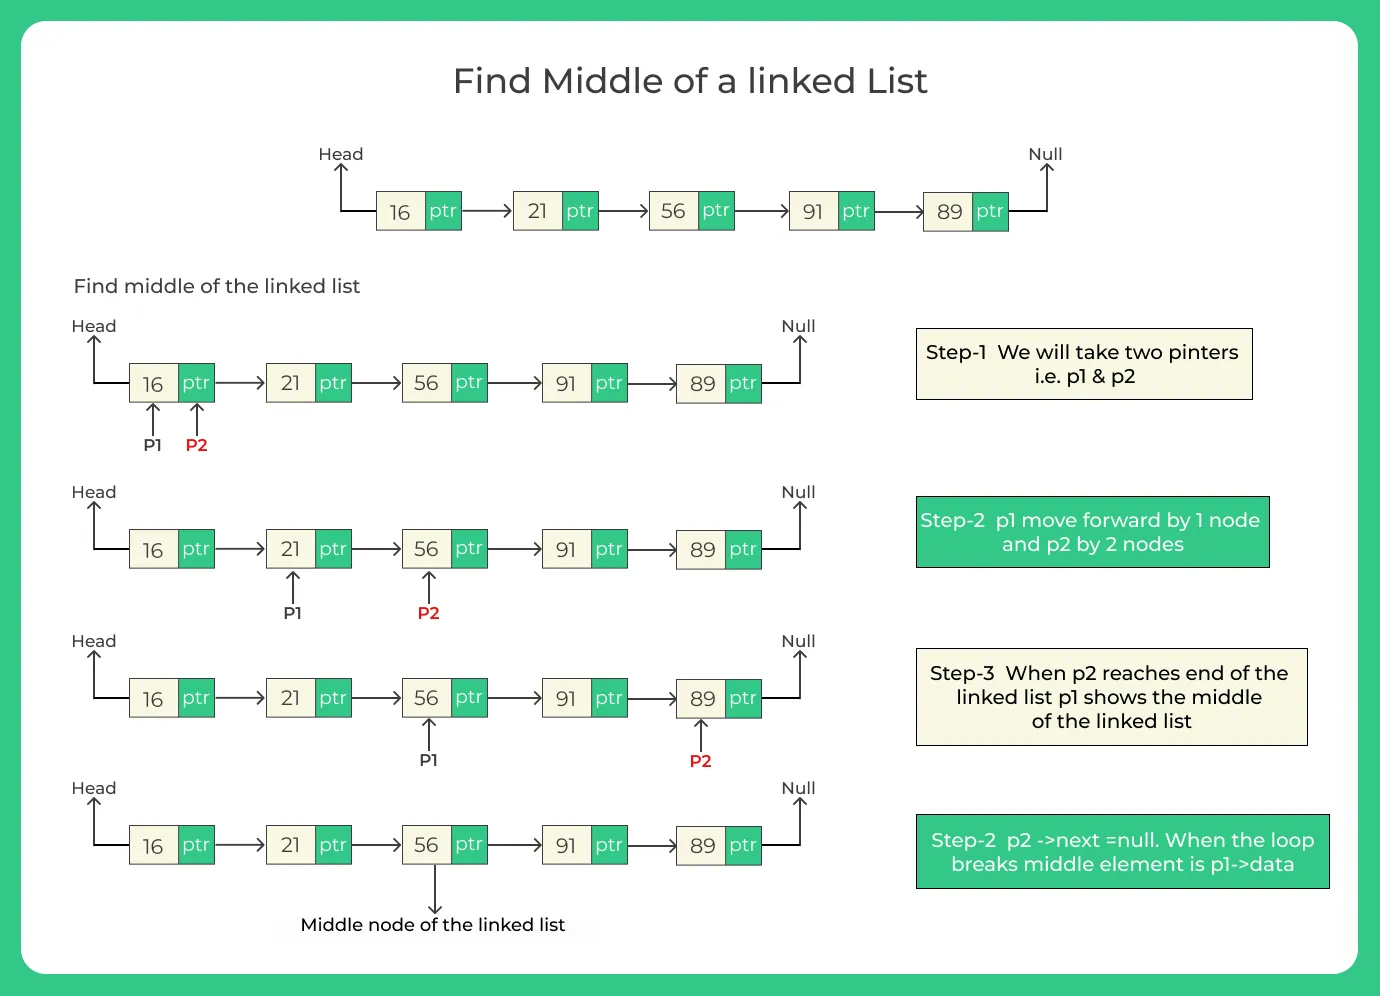 c++ program to find the middle of the linked list